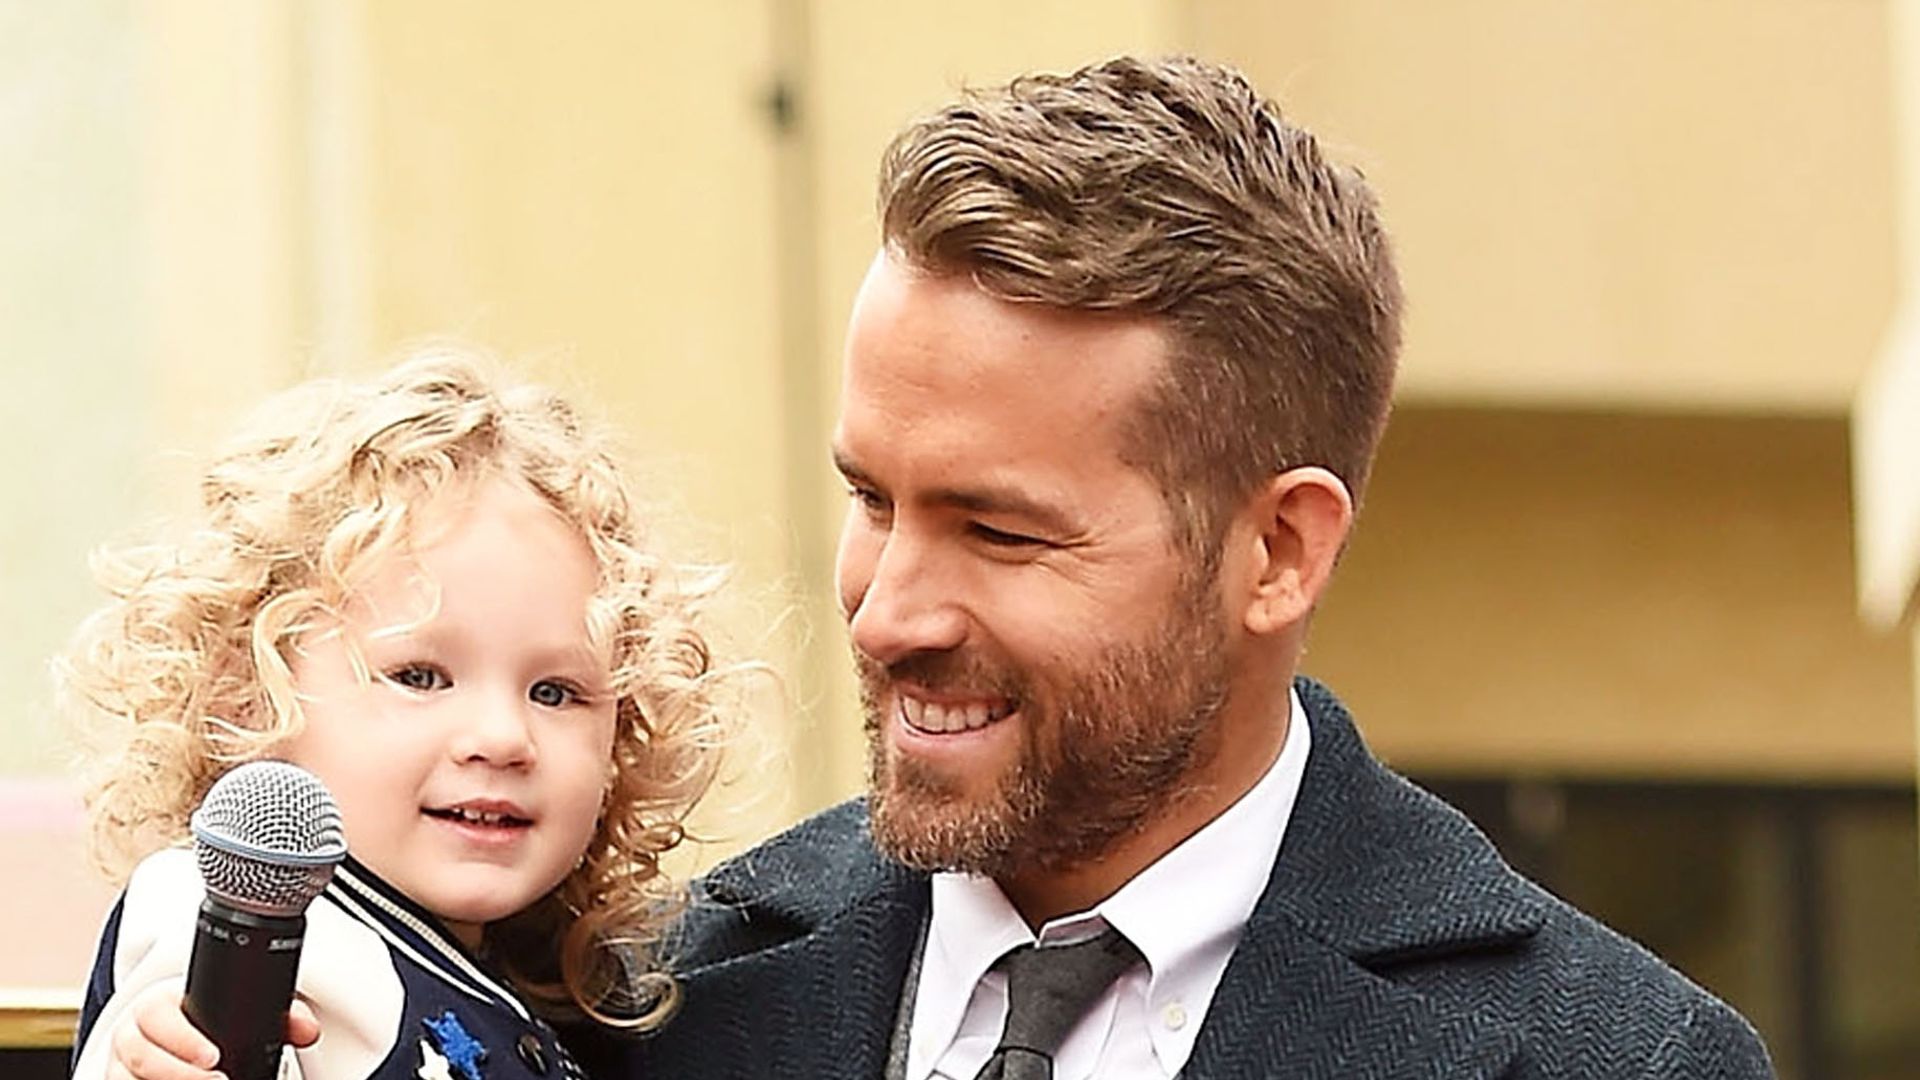 Ryan Reynolds shares touching story involving his and Blake Lively's daughter James in heartfelt tribute